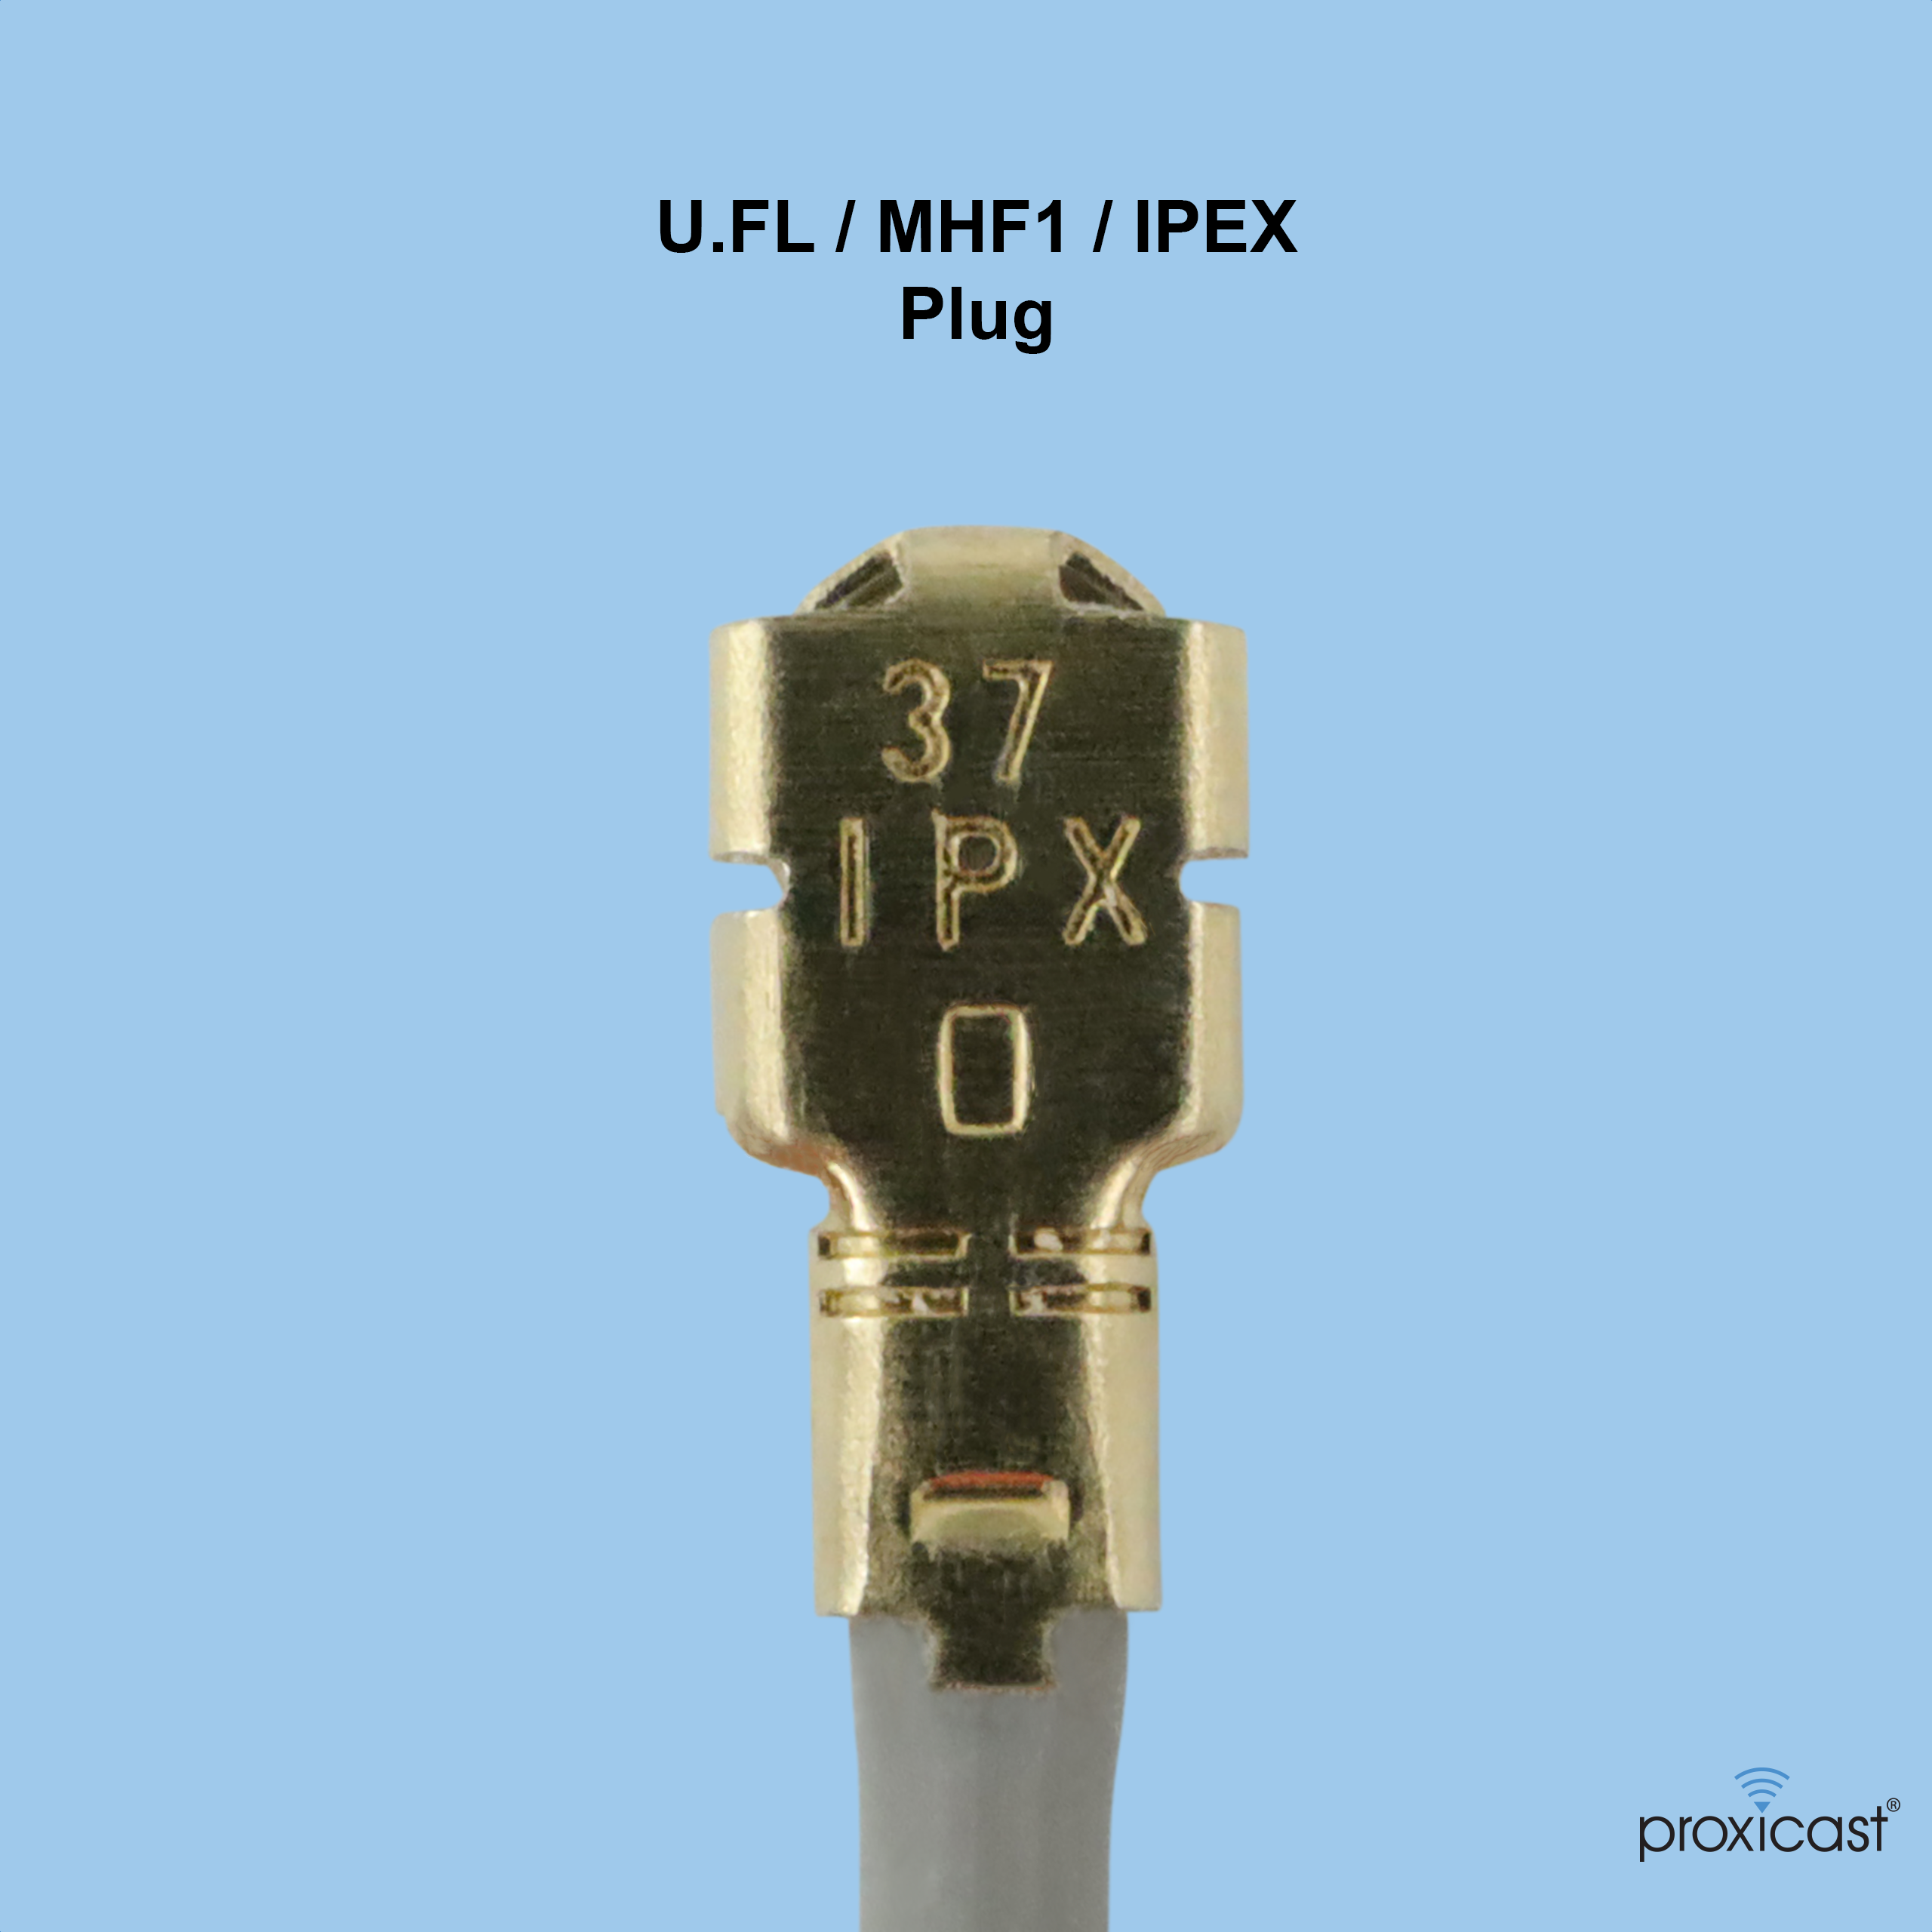 Cellular Routers & Modems :: Accessories :: Proxicast 8 inch U.FL (IPEX   MHF1) to SMA Female Ultra Low-Loss 1.37mm Coaxial Pigtail Jumper Cable for  4G, LTE, 5G, Bluetooth, ZigBee, 900 MHz,